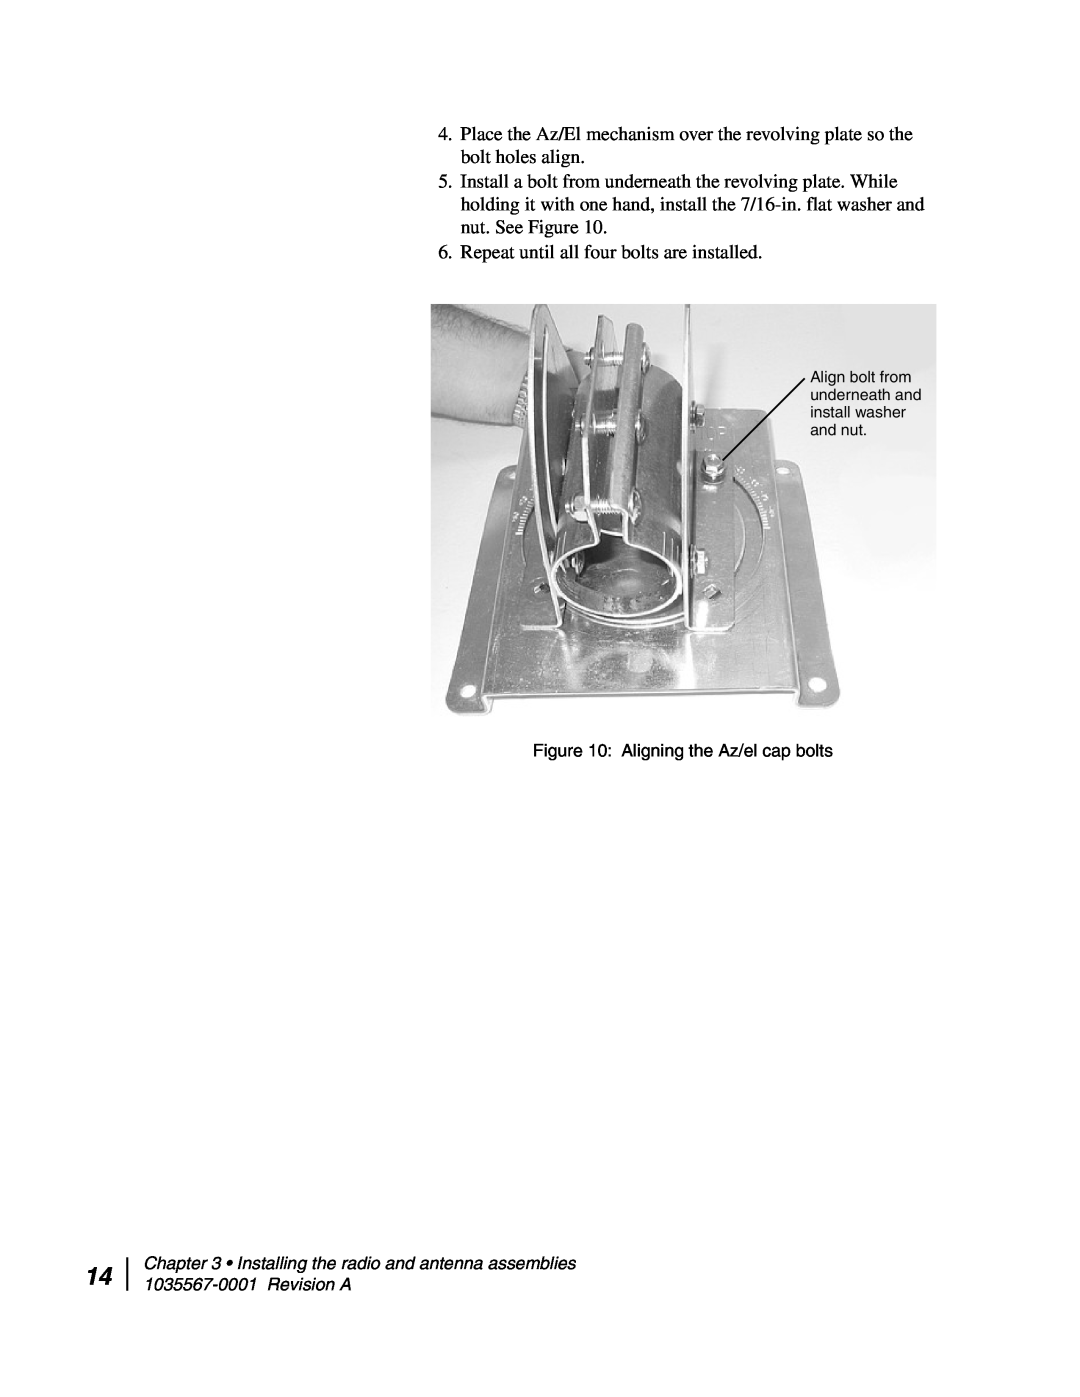 Hughes AN4-074-DF installation manual Repeat until all four bolts are installed 